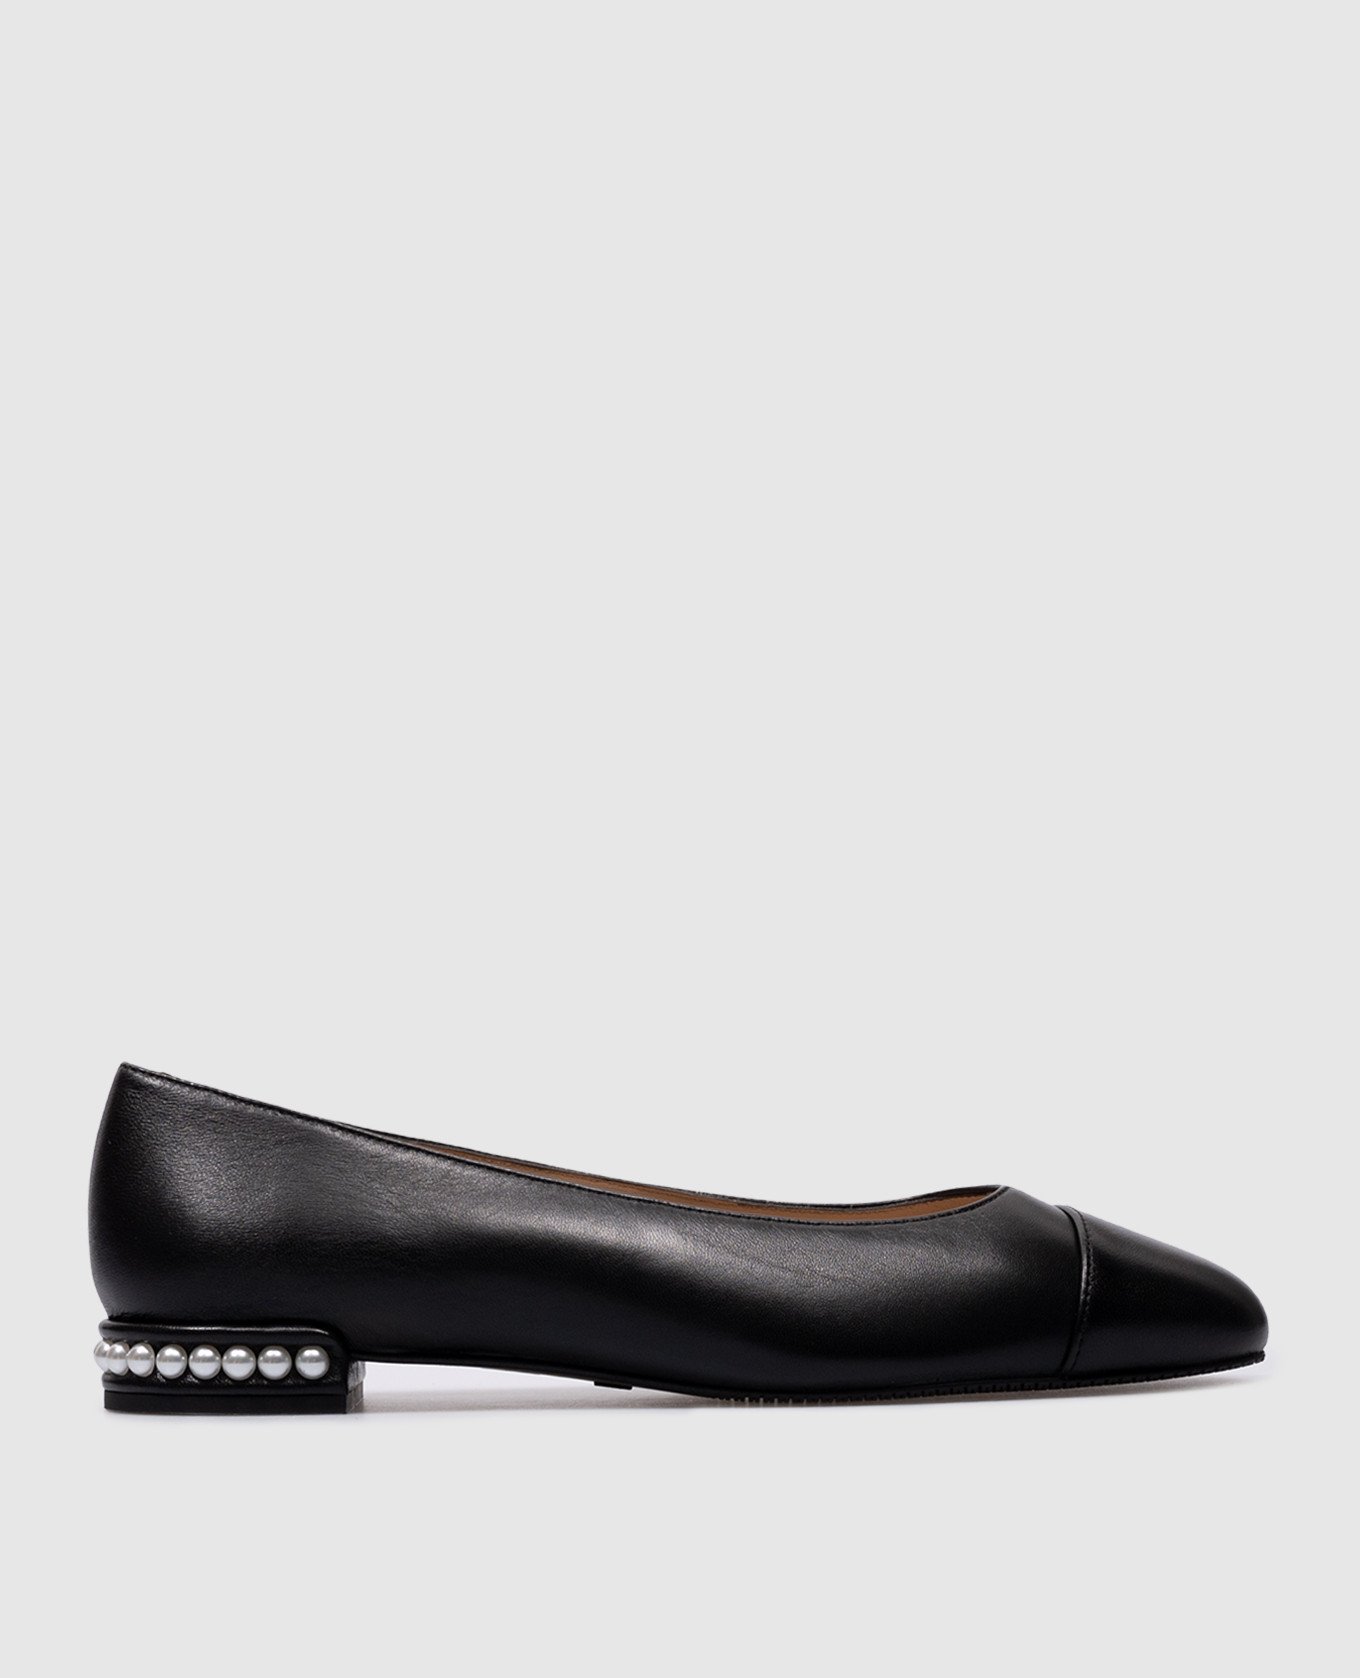 Pearl black leather ballet flats with beads